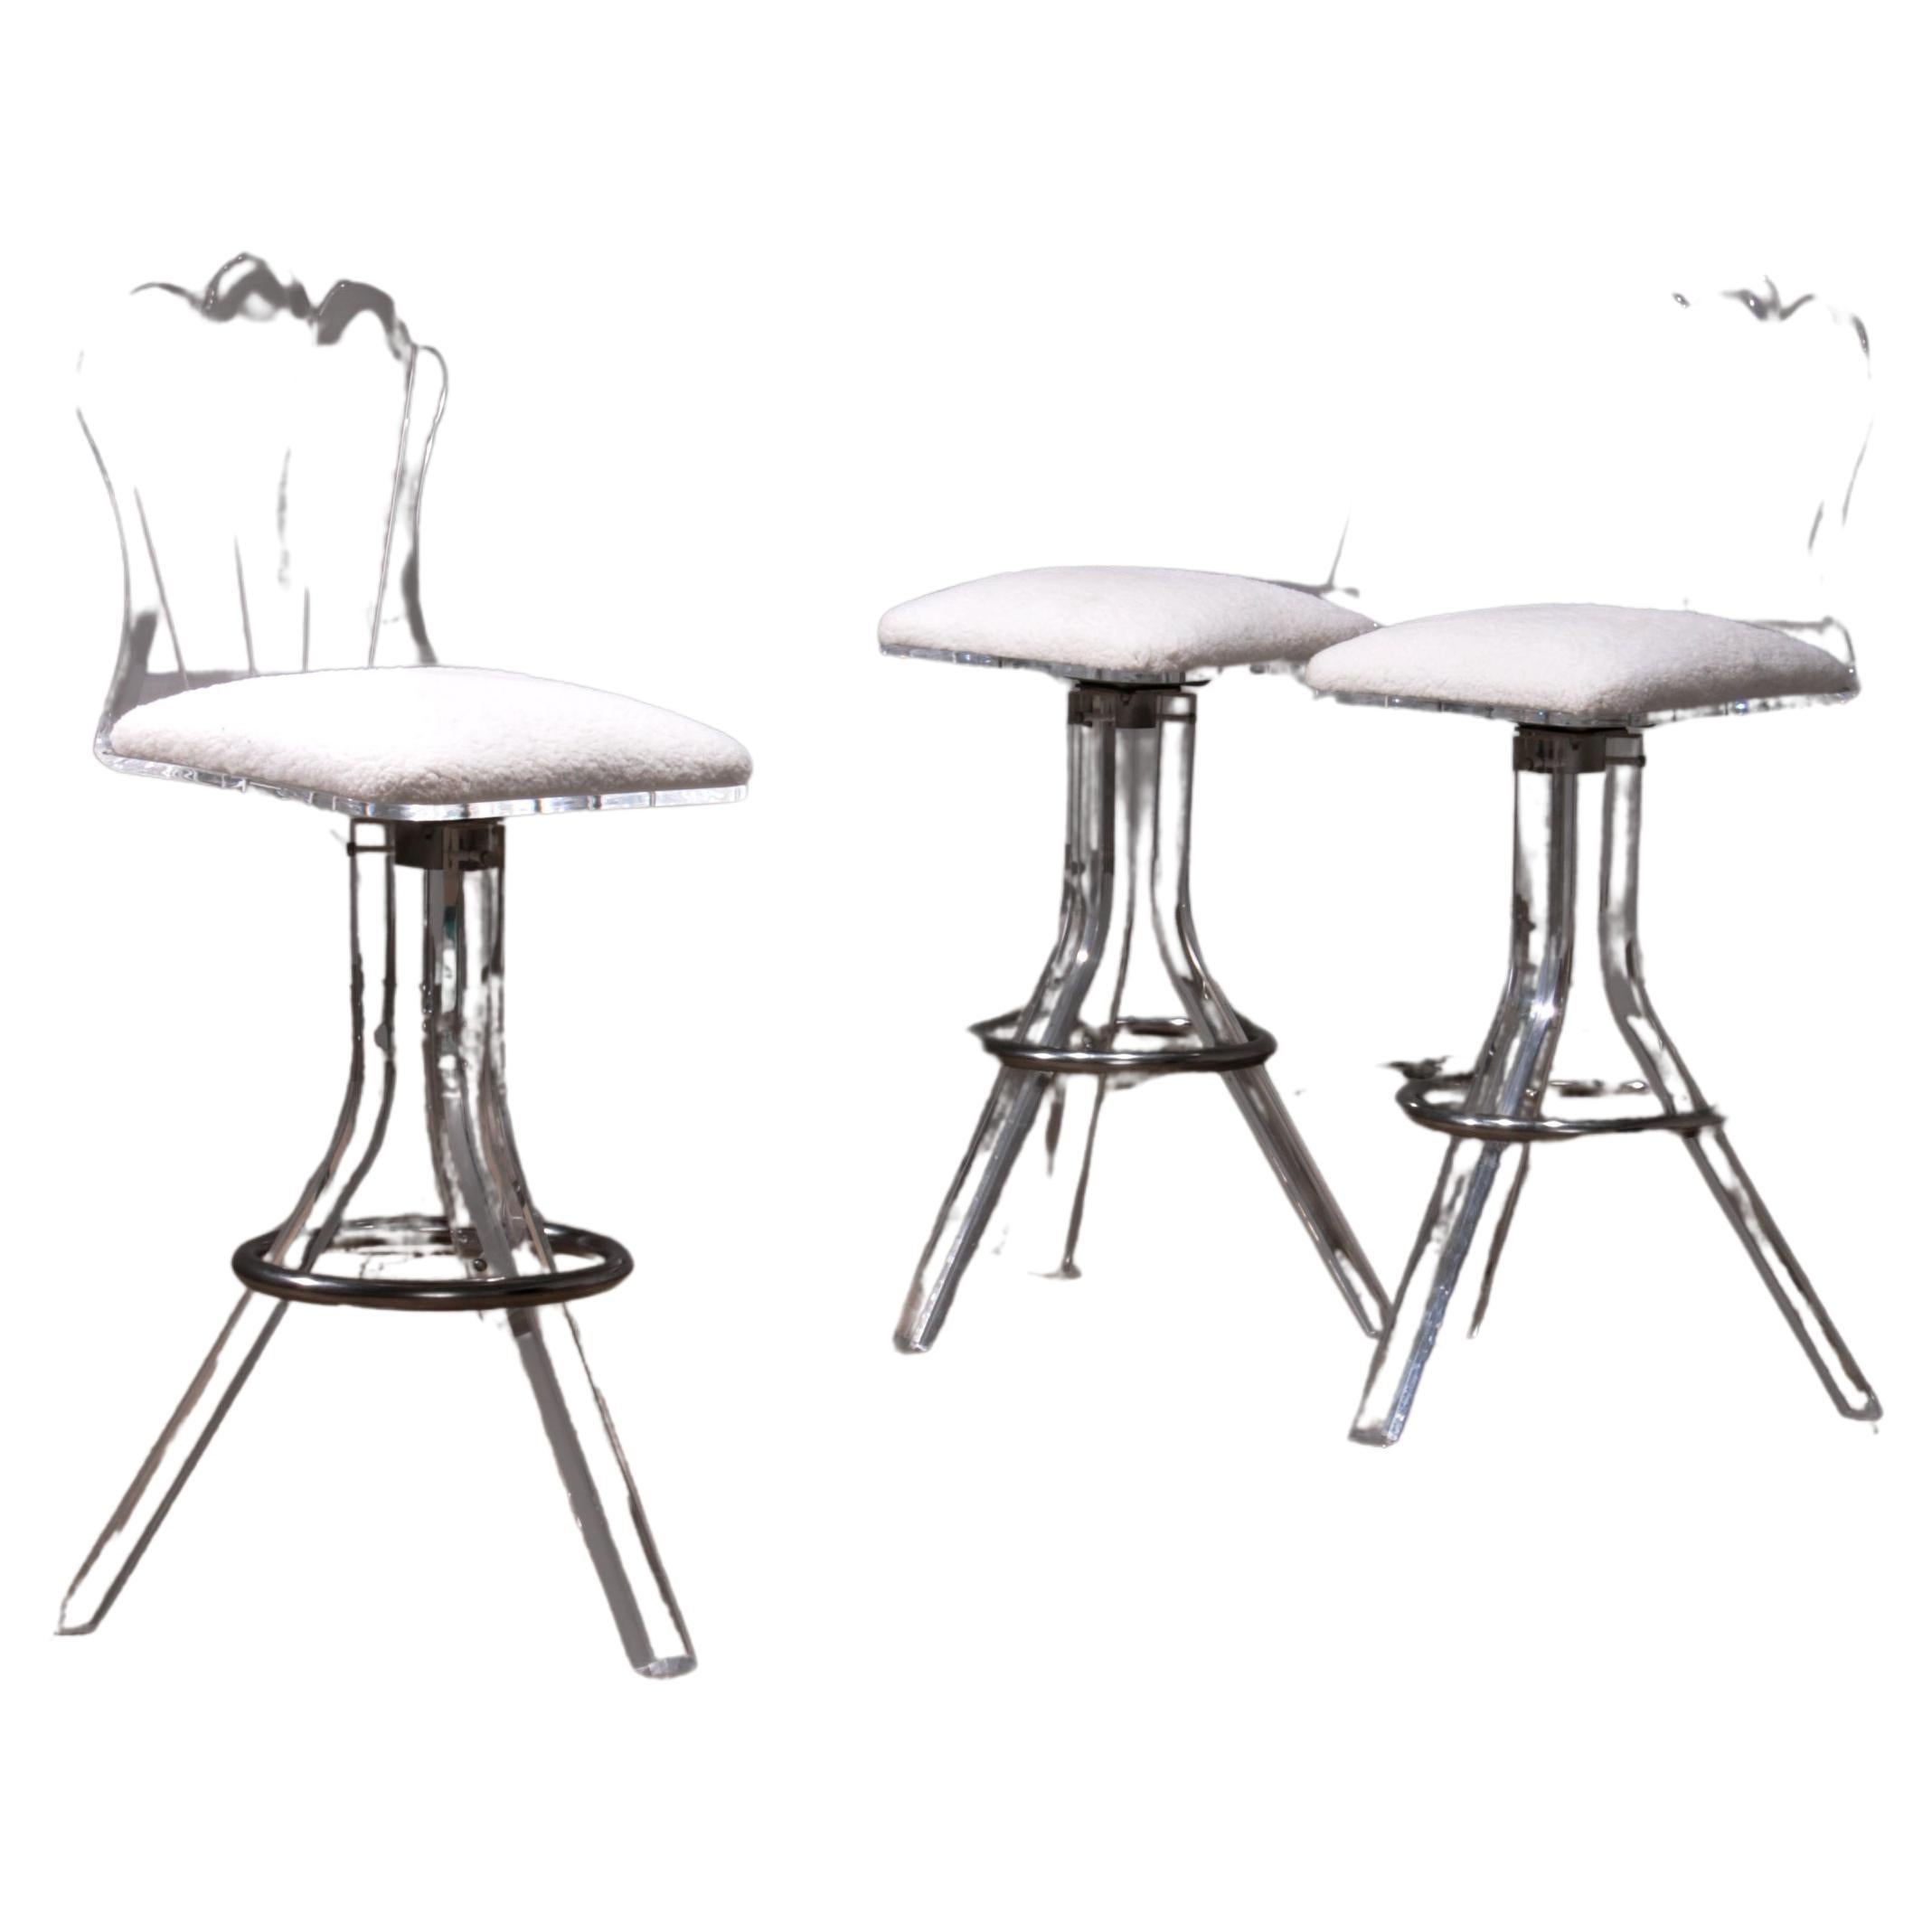 Plexiglass lucite bar stools and chrome swivel bar chairs, Hill Manufacturers For Sale